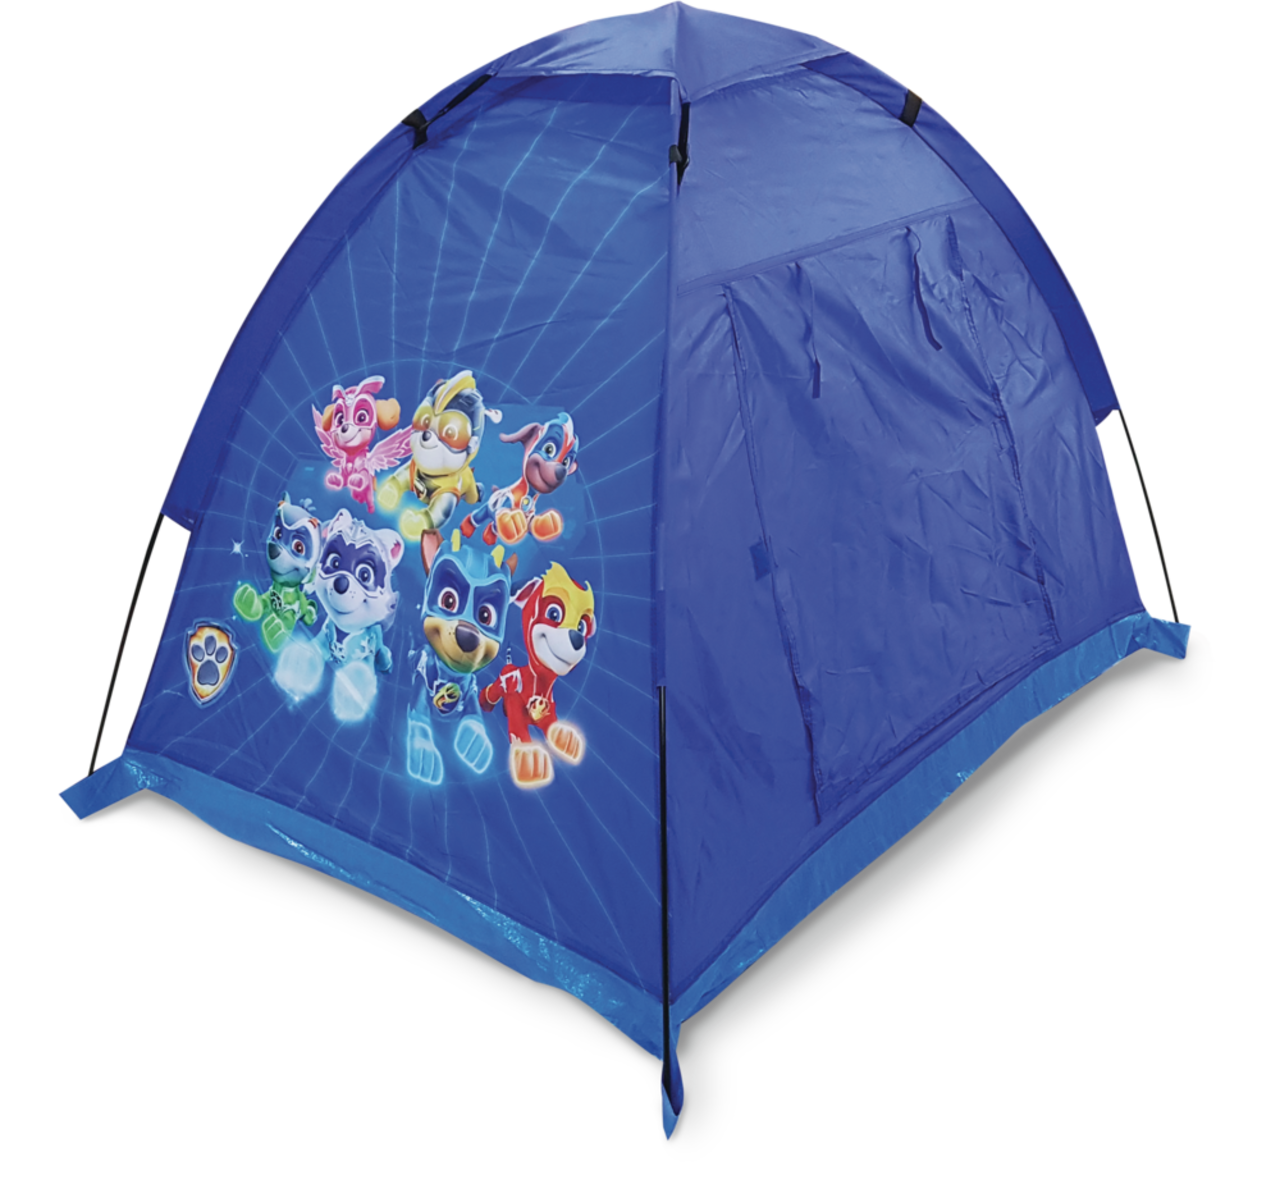 https://media-www.canadiantire.ca/product/playing/camping/tents-shelters/0763750/kids-tent-paw-patrol-11a562d7-8323-4b87-8d21-91808825c358.png?imdensity=1&imwidth=640&impolicy=mZoom